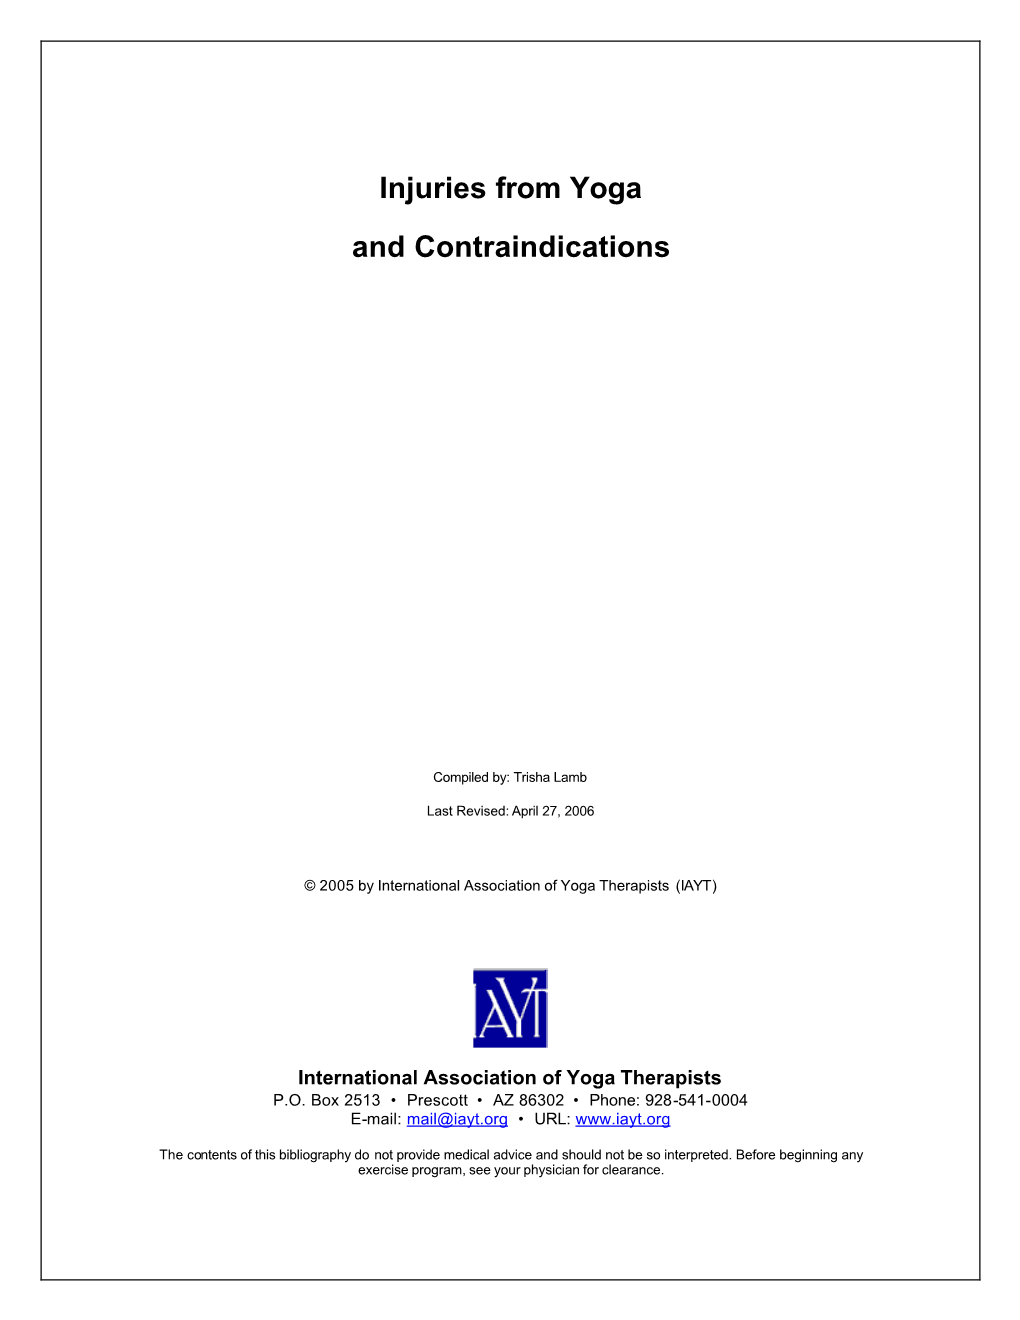 Injuries from Yoga and Contraindications